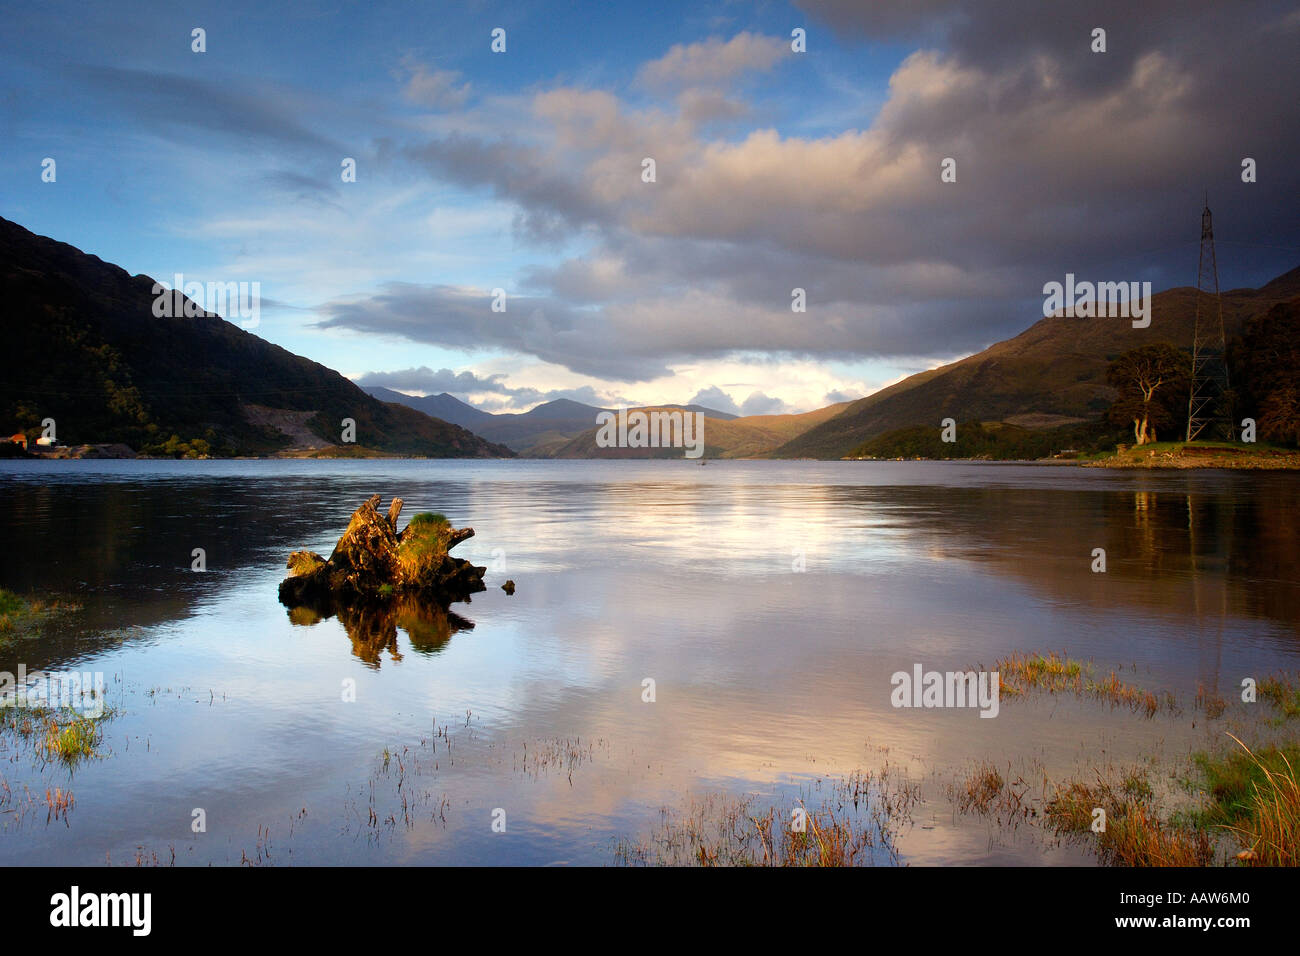 Late evening view of southern end of Loch Etive near Bonawe Taynuilt in the Scottish Highlands calm and tranquil Stock Photo